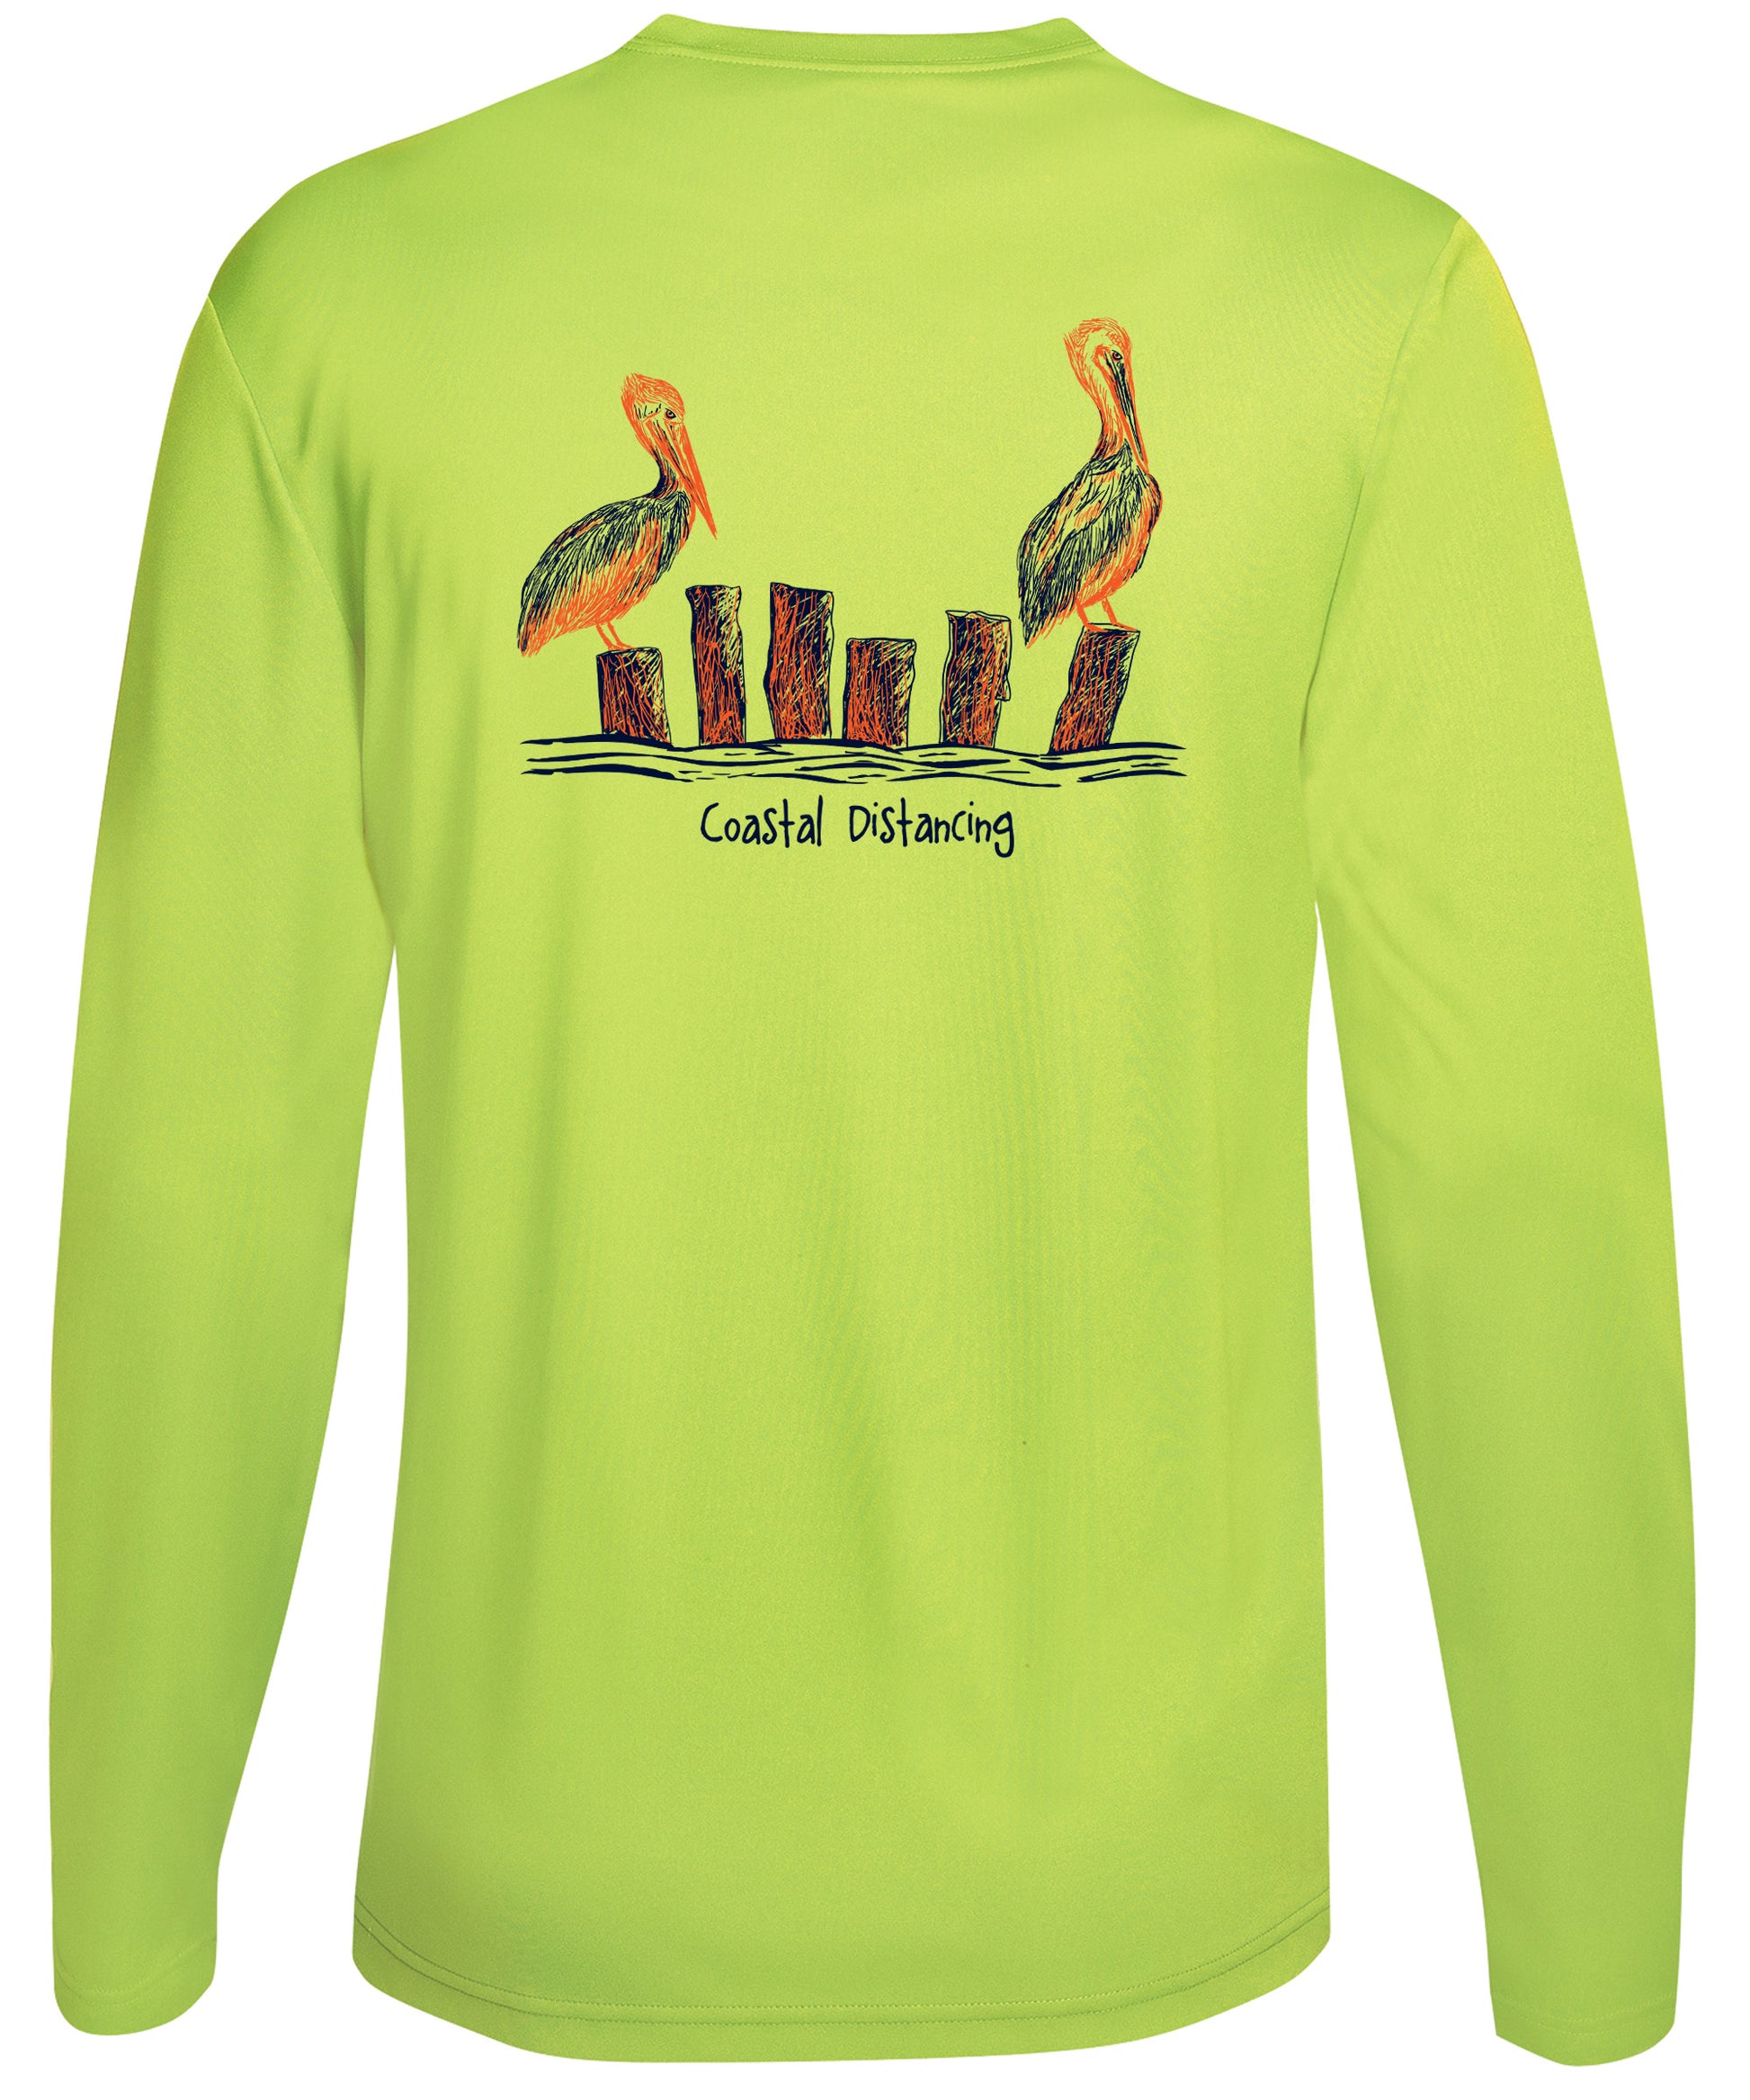 Pelicans Coastal Distancing Performance Dry-fit Neon Green Long Sleeve Shirts